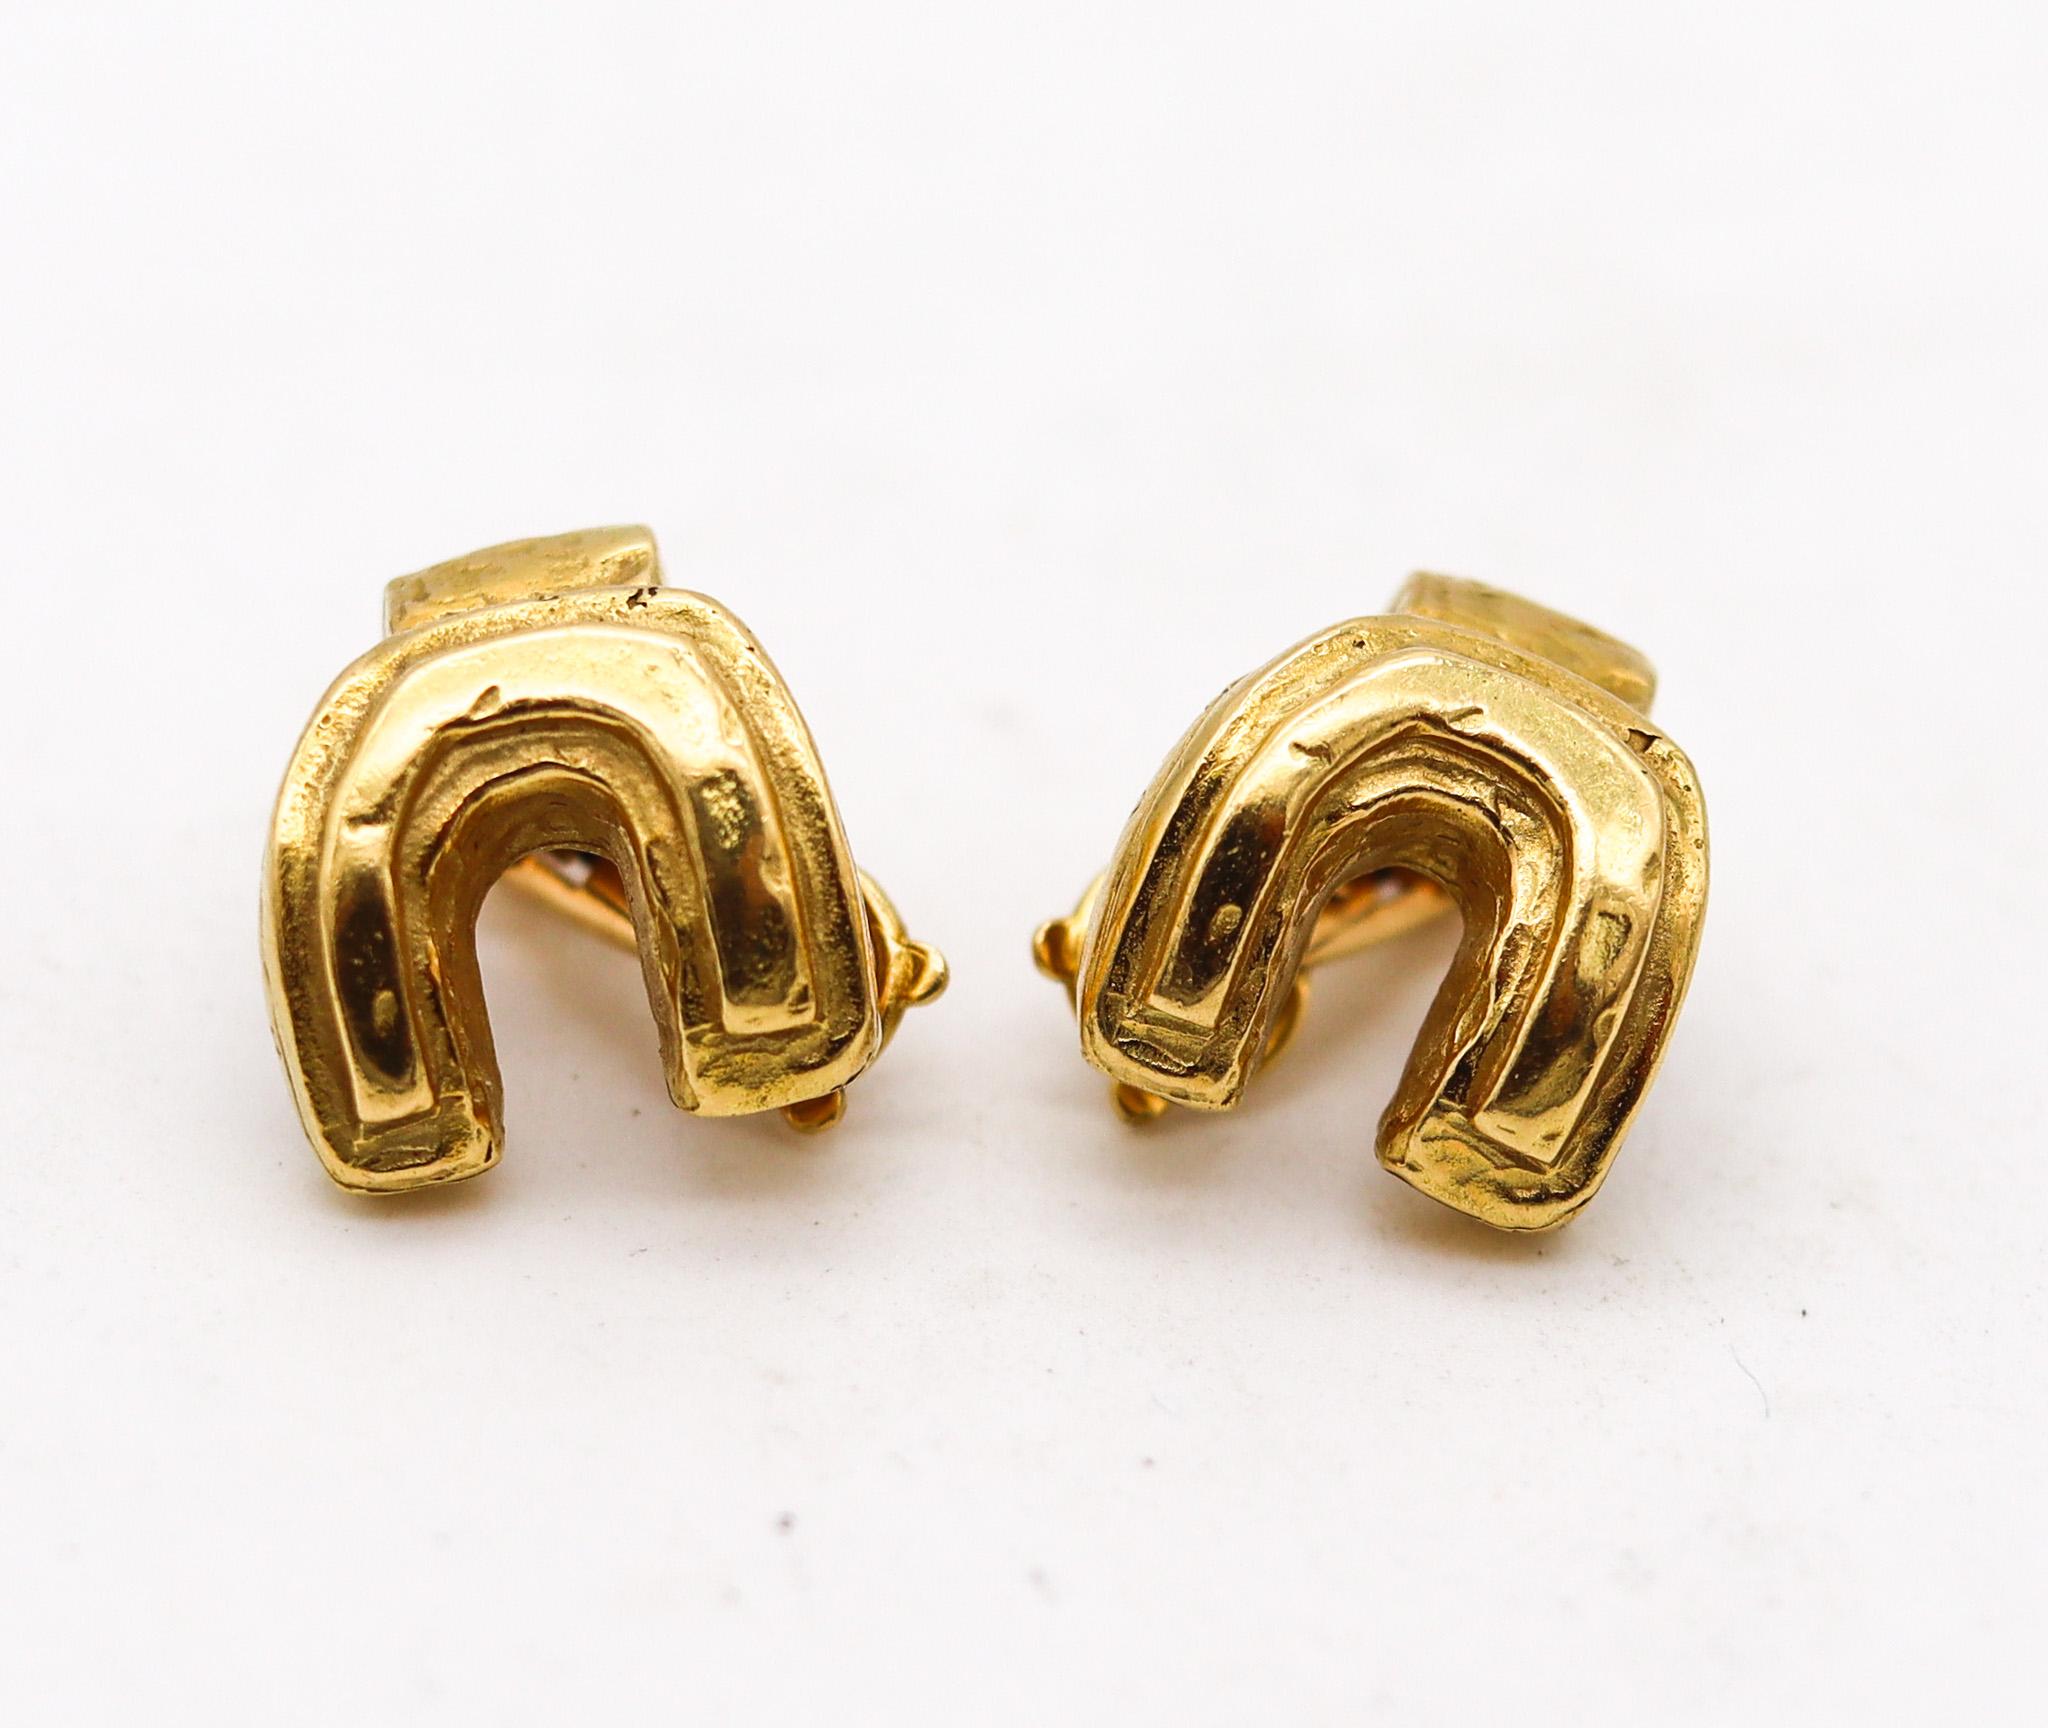 Sculptural clip earrings designed by Liuba Wolf.

Extremely rare sculptural clips on earrings, created in Sao Paulo Brazil by the artist Liuba Wolf, back in the 1970. This fantastic pair is a one of a kind and has been crafted with concretism art